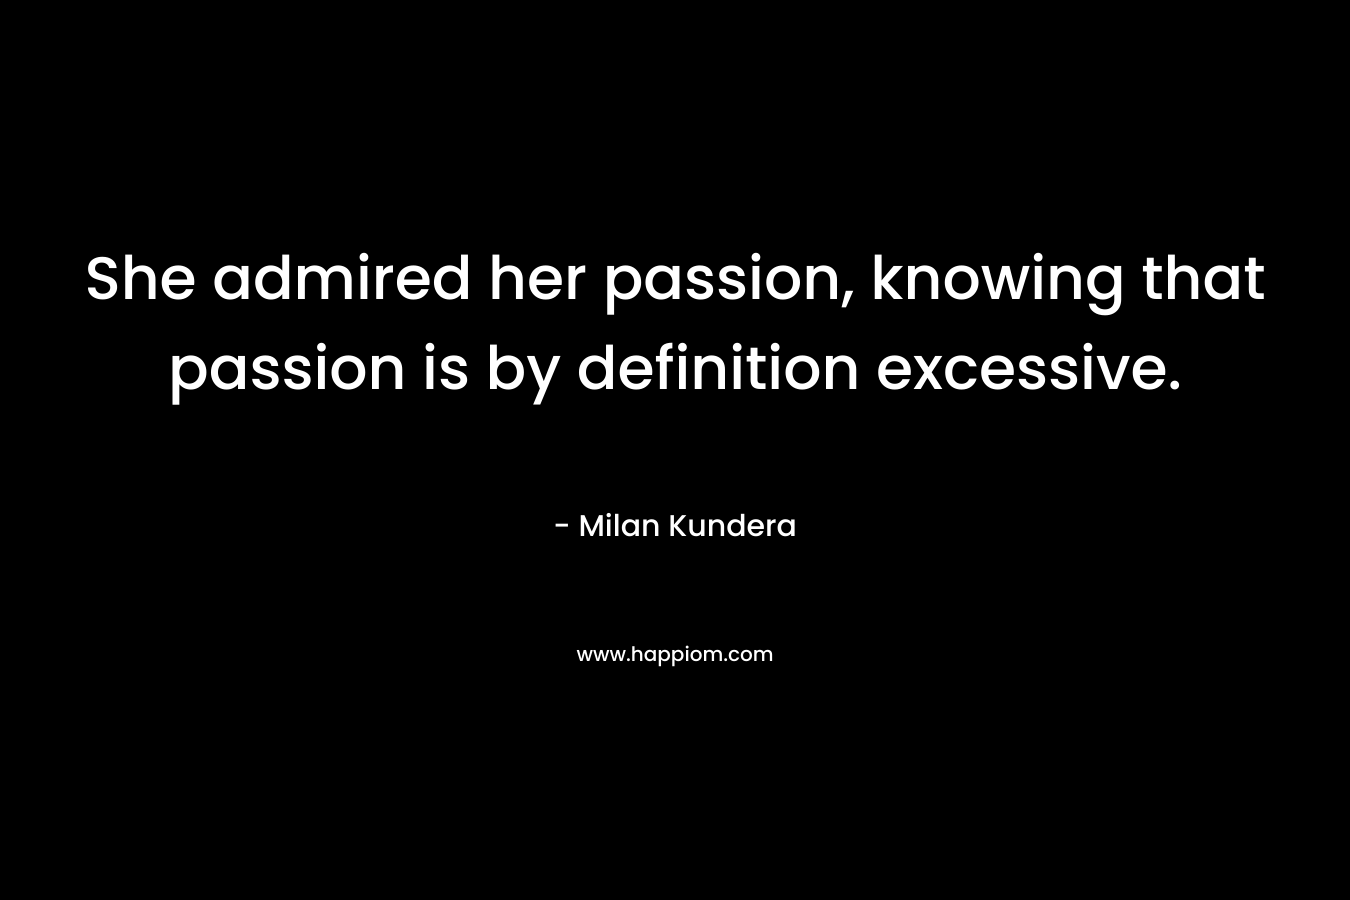 She admired her passion, knowing that passion is by definition excessive.